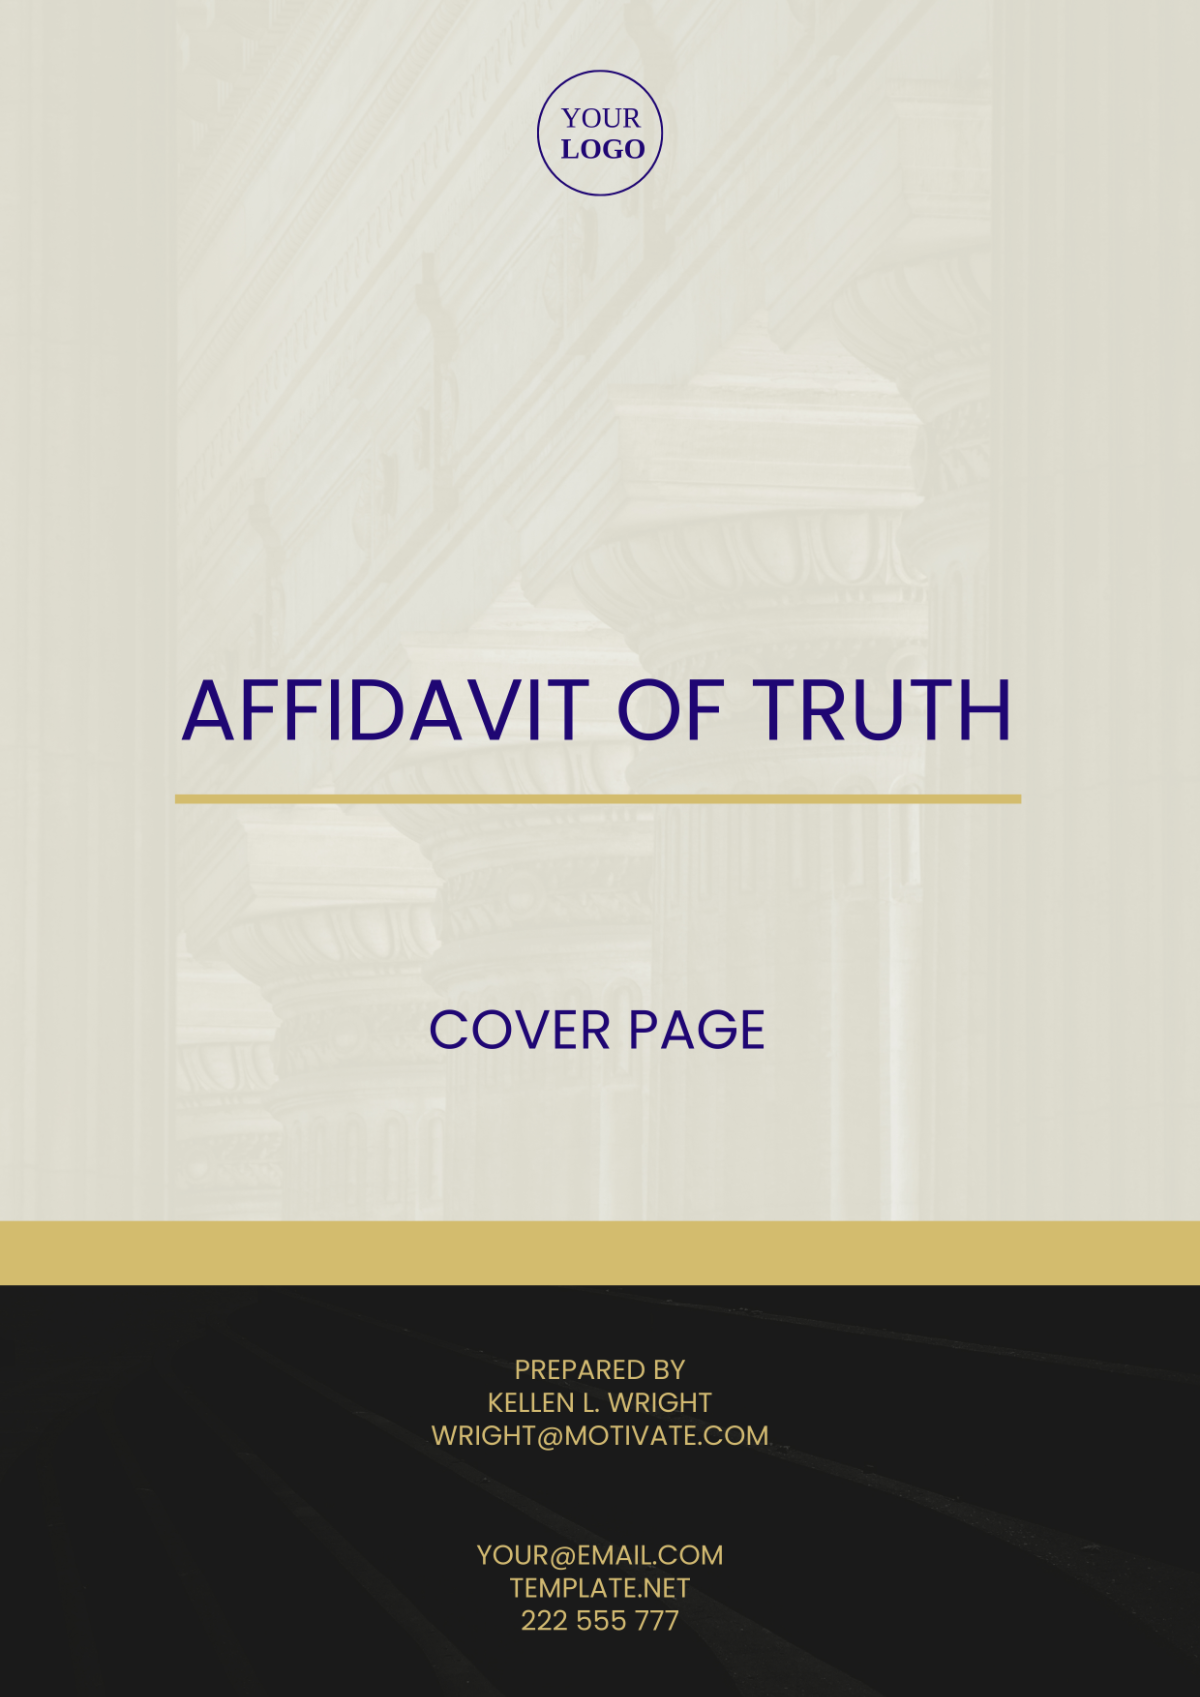 Affidavit of Truth Cover Page Template